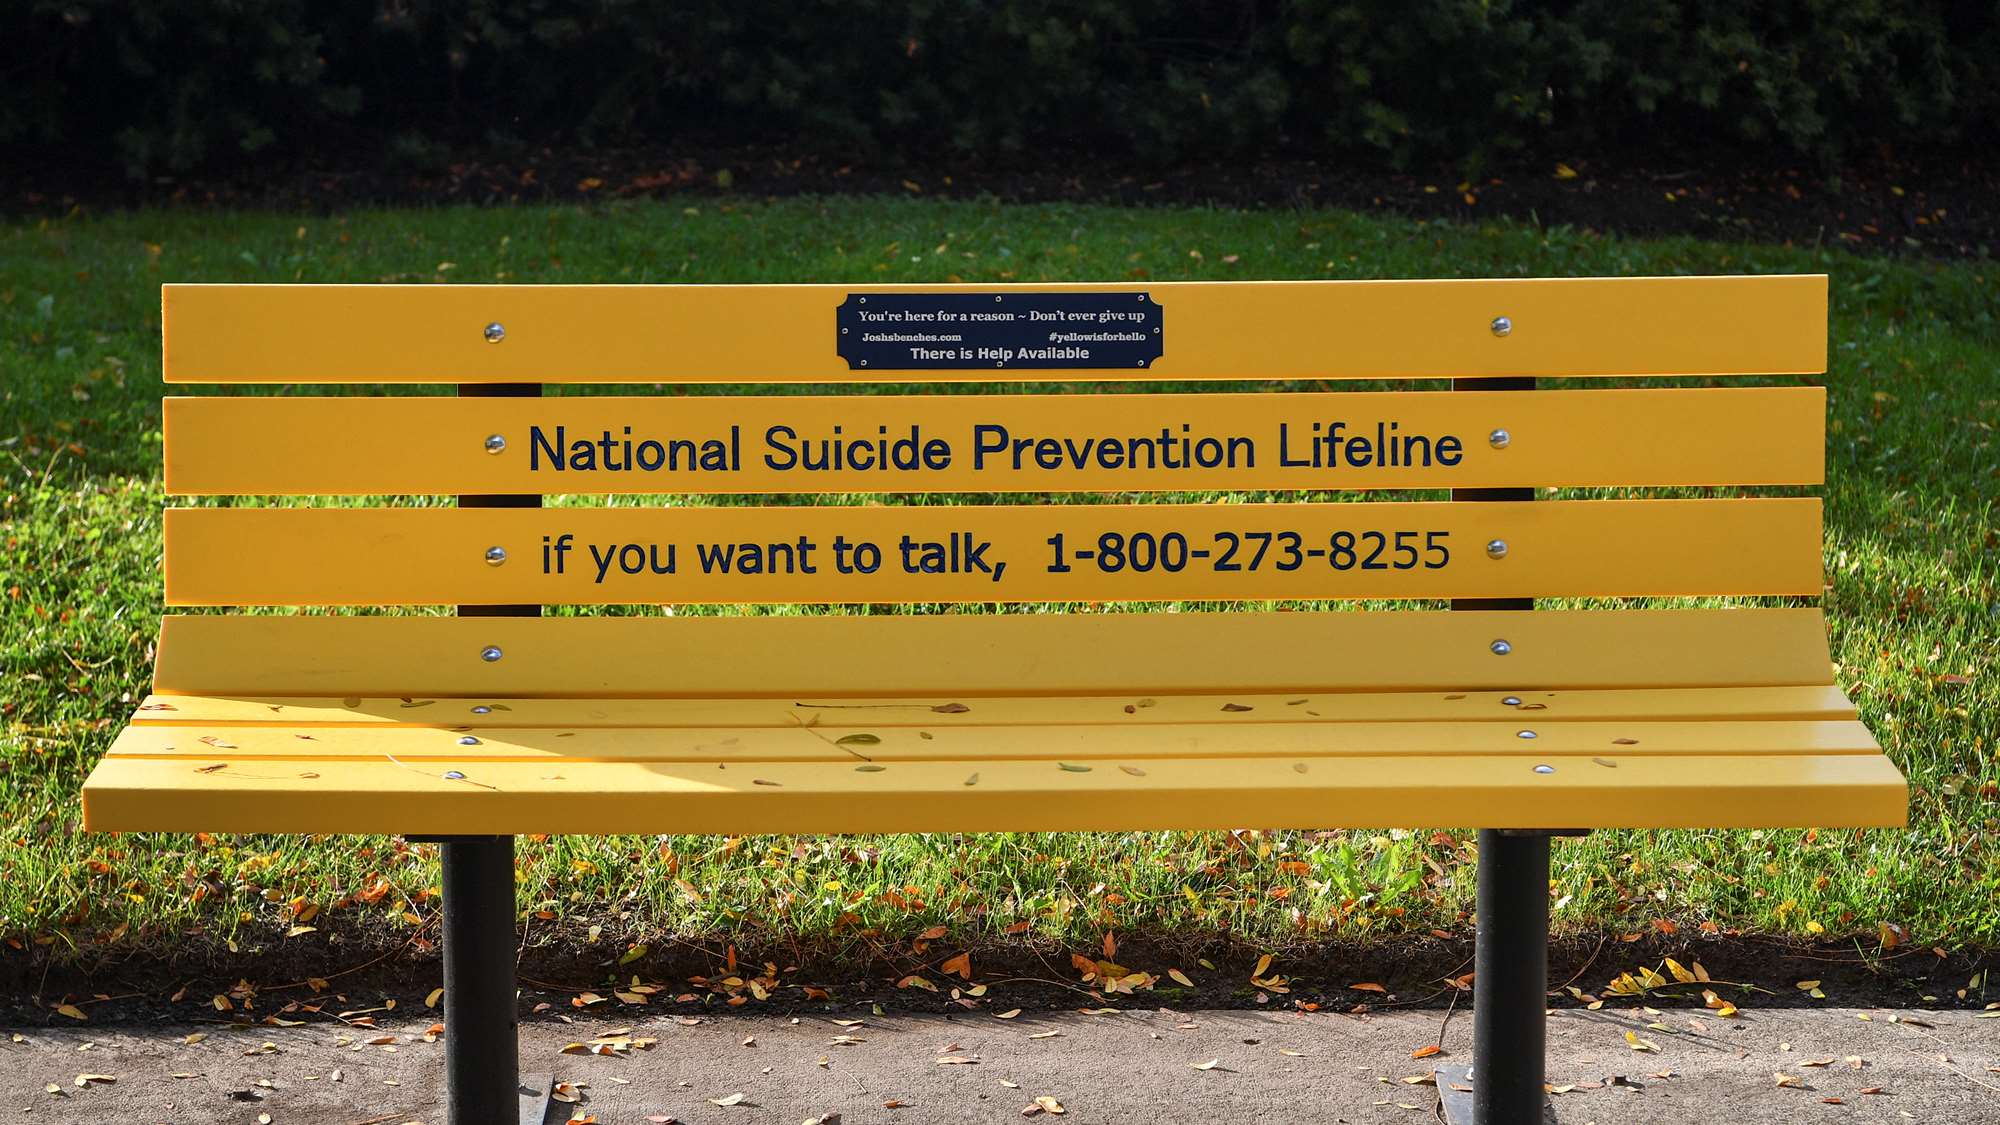 Yellow bench outside that has information for the National Suicide Prevention Lifeline: If you want to talk, call: 1-800-273-8255.  